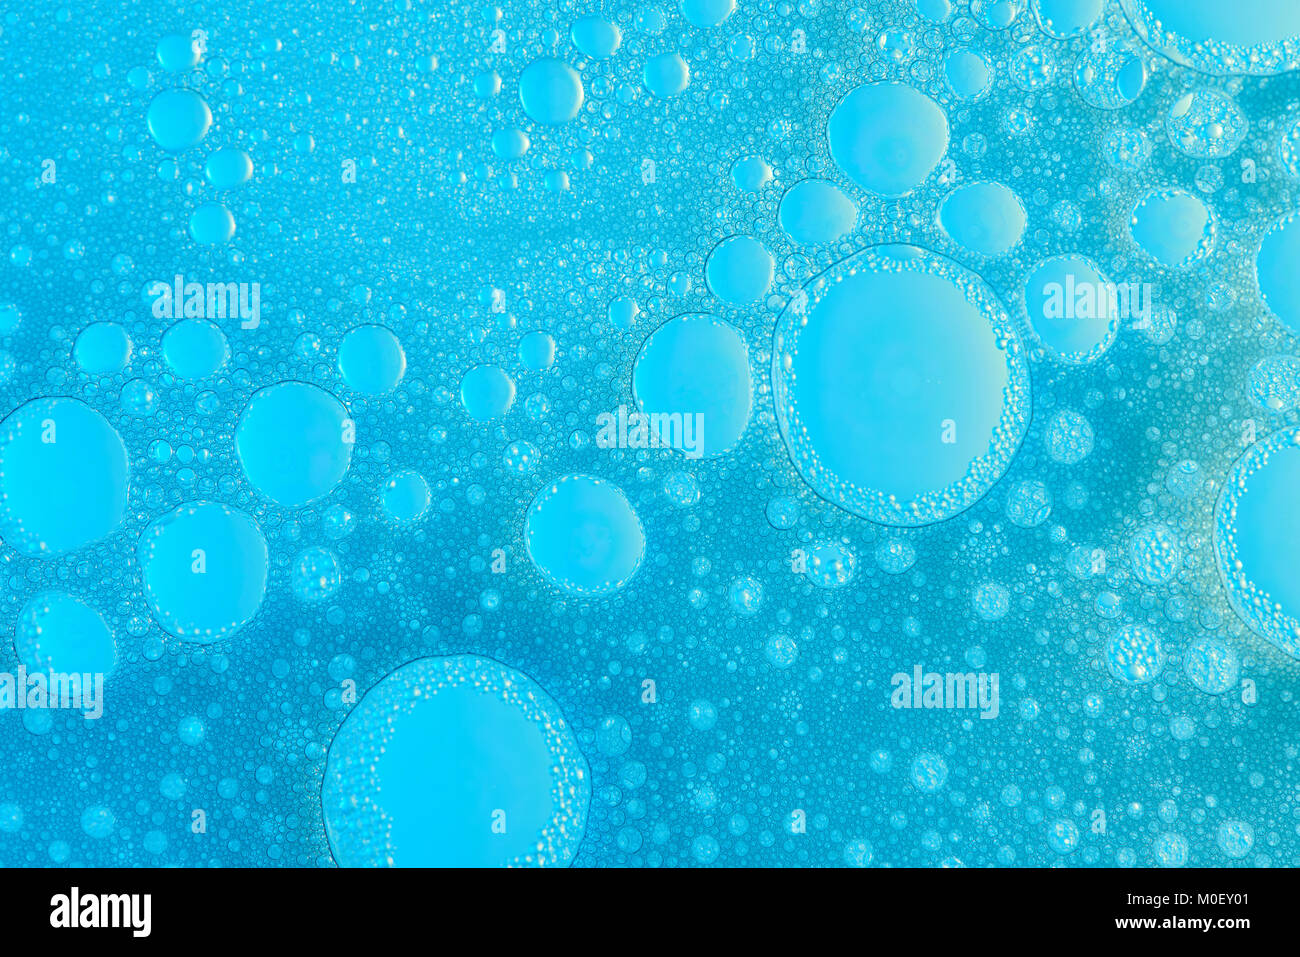 Blue washing liquid bubble background close up. Abstract bubble texture ...